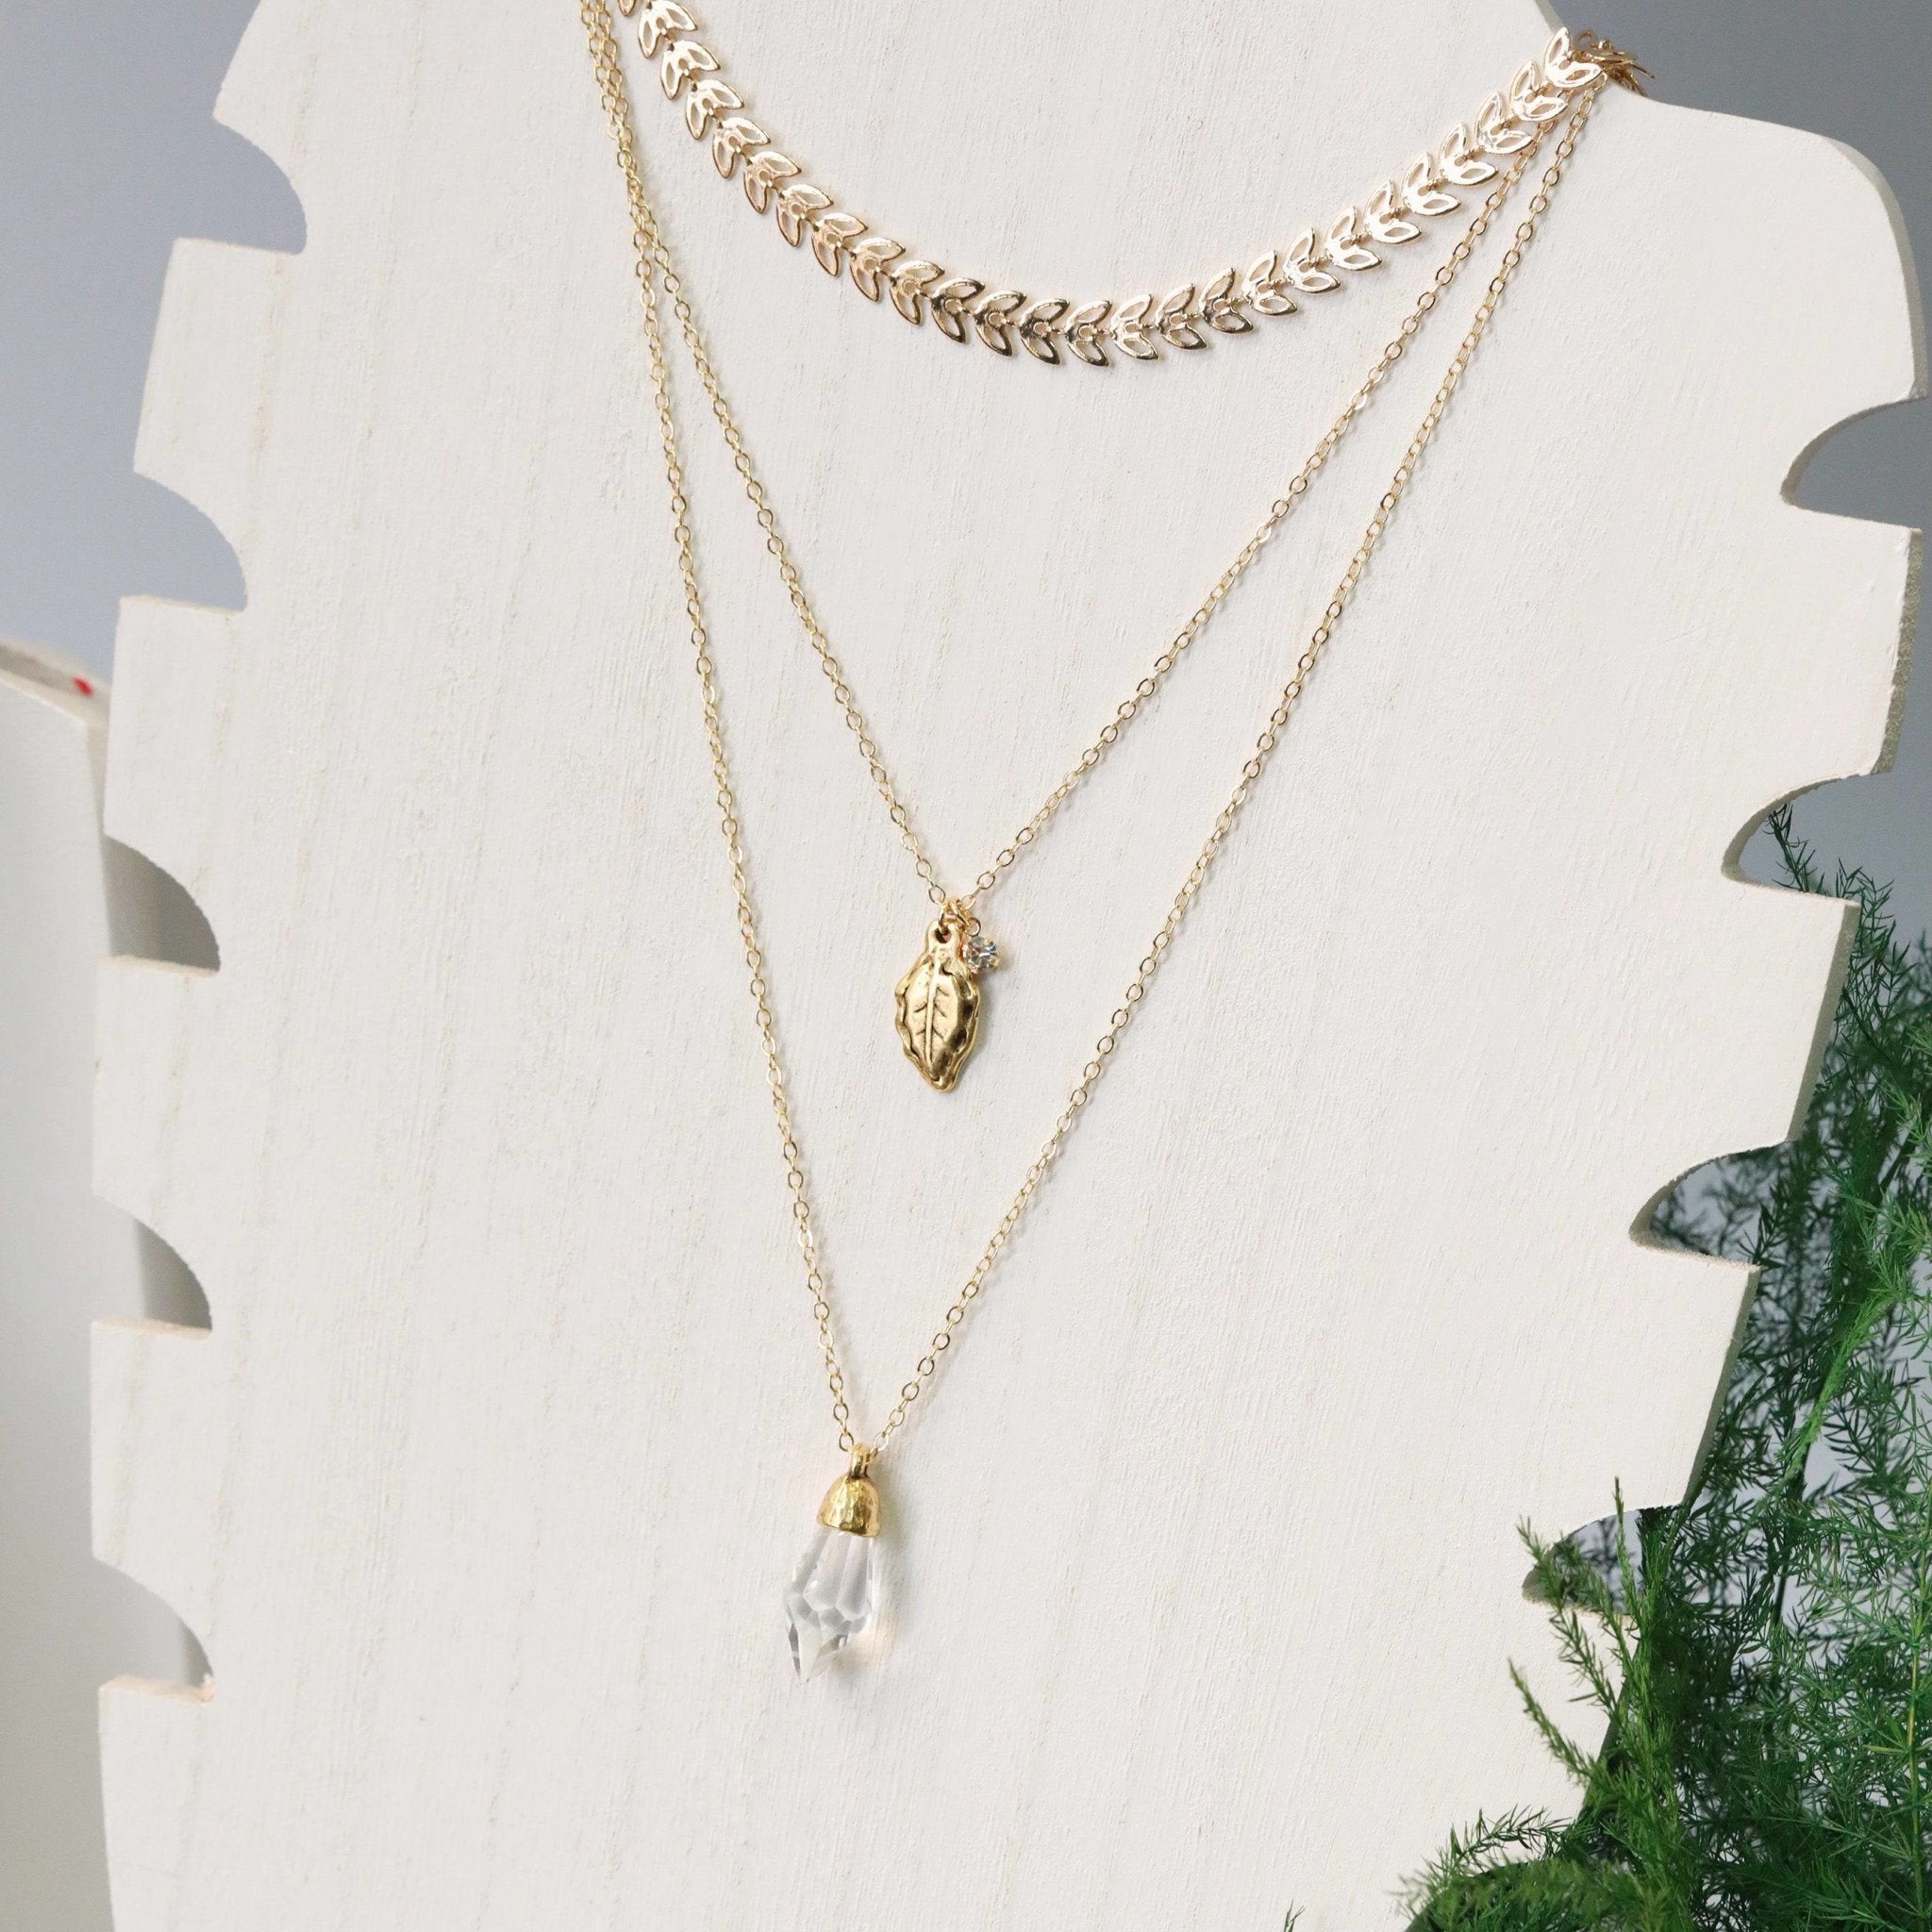 Dowsing Crystal Pendant Necklace - The Gilded Witch